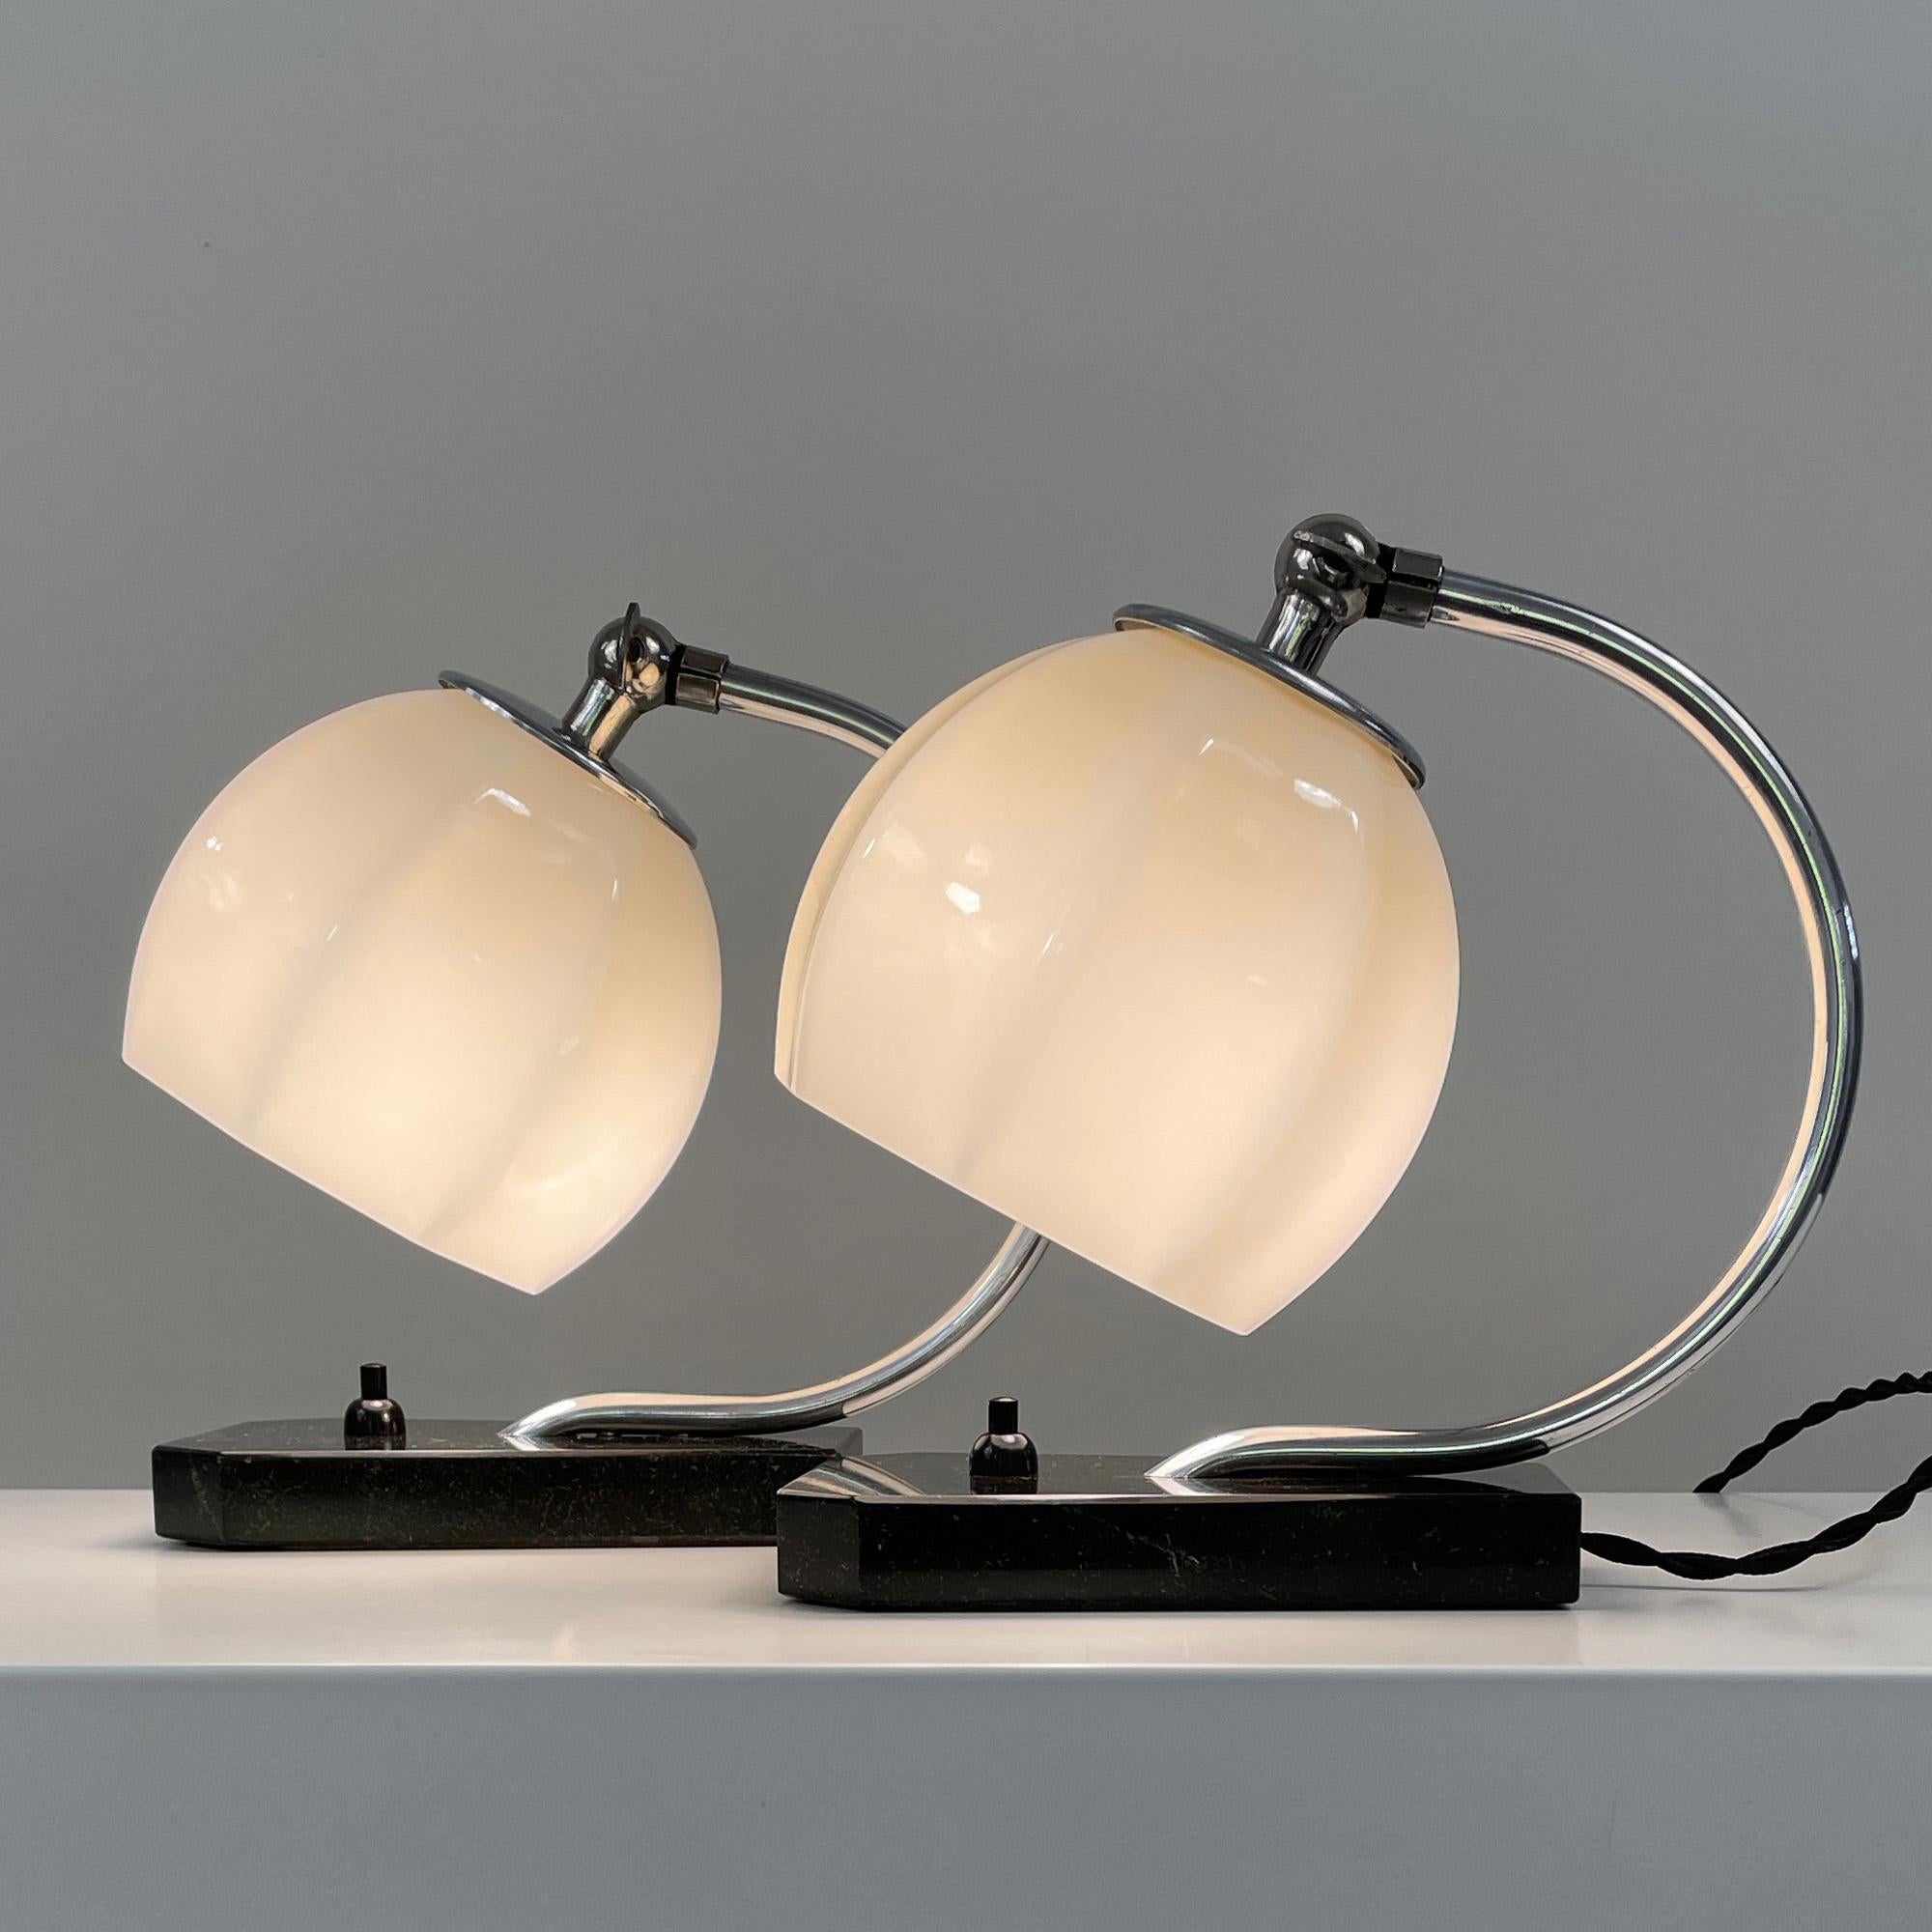 German Art Deco Opaline Glass, Marble and Aluminum Table Lamps, 1930s For Sale 9